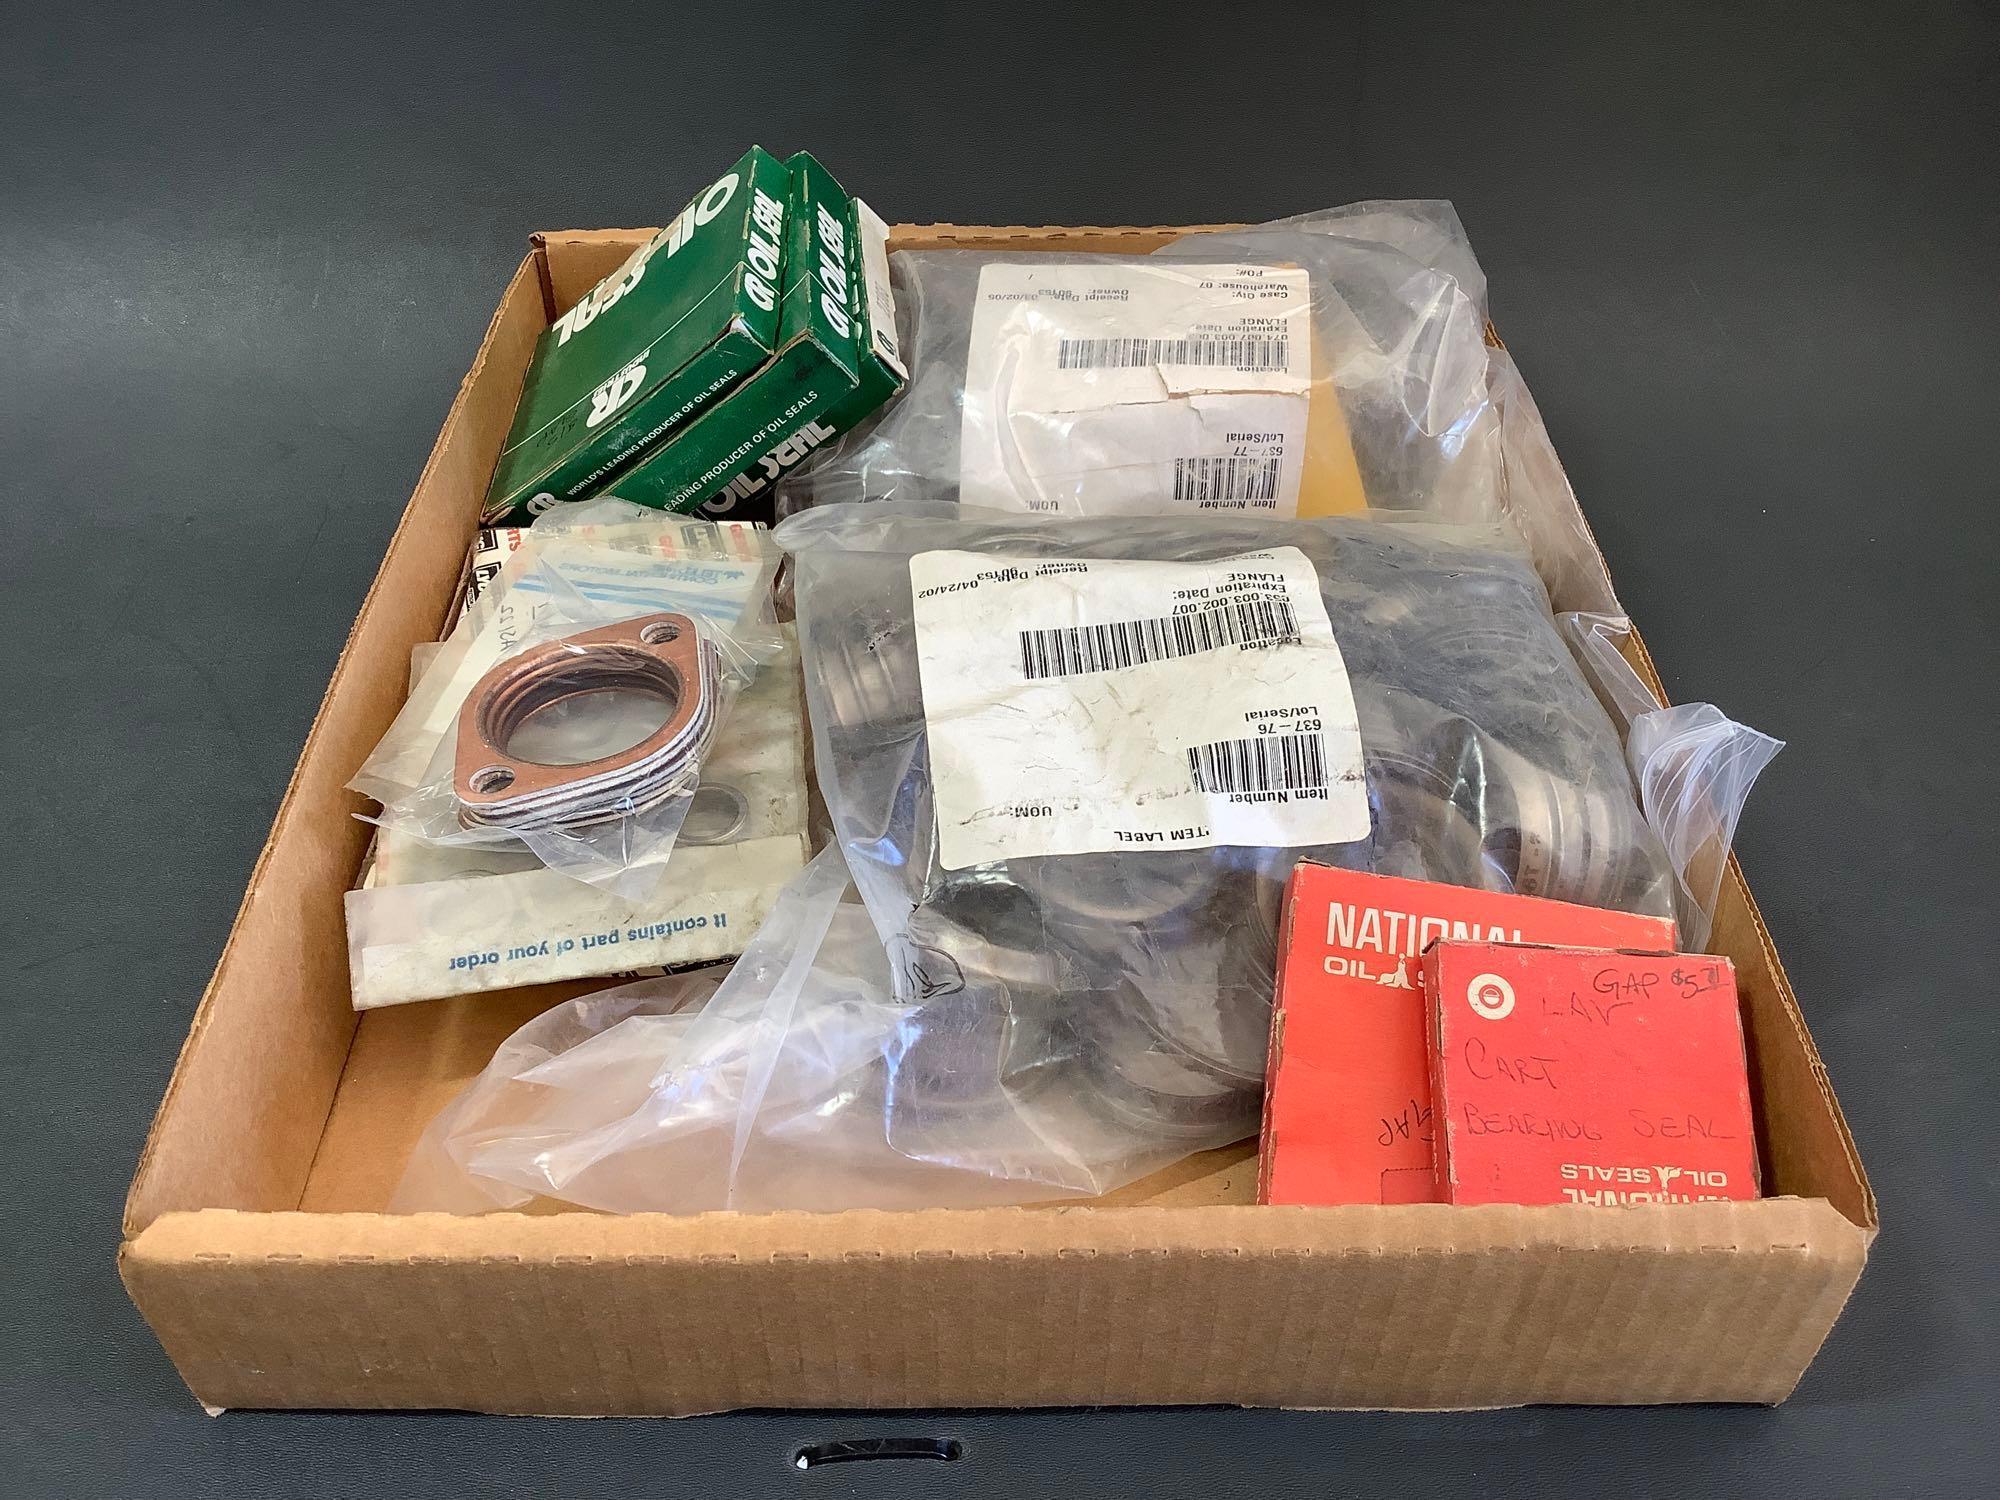 BOXES OF NEW & USED PUSH ROD HOUSINGS, COPPER GASKETS, VALVE SPRINGS & SEATS & SPECIALTY HARDWARE